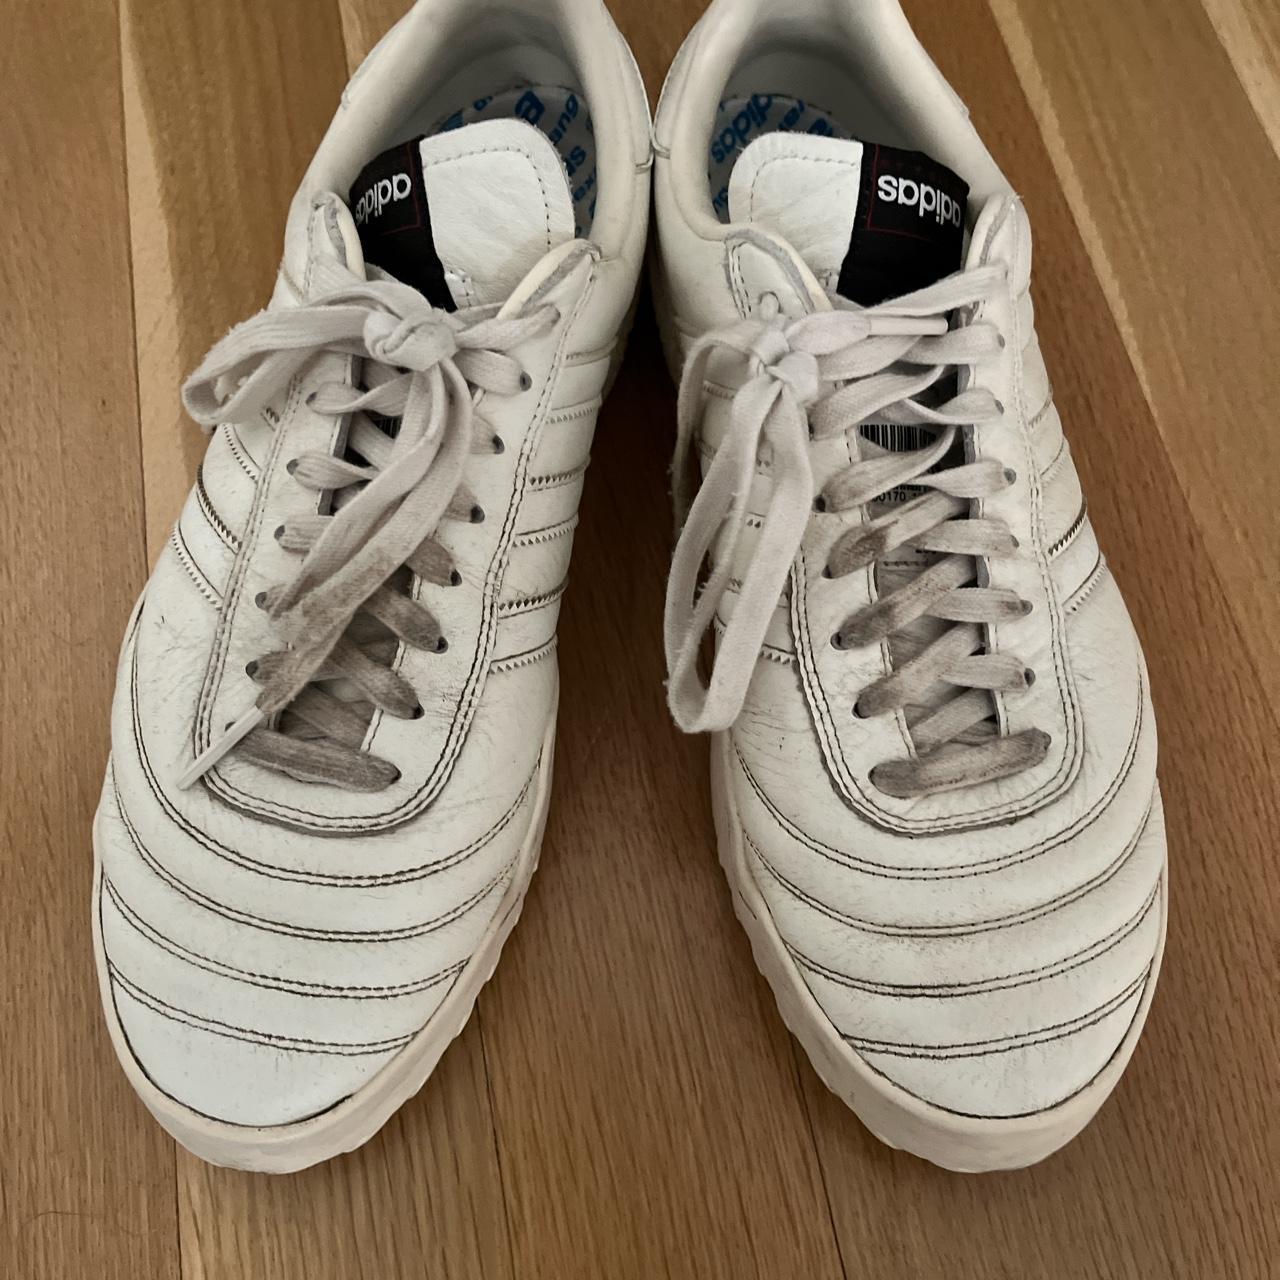 Alexander Wang Men's White and Grey Trainers